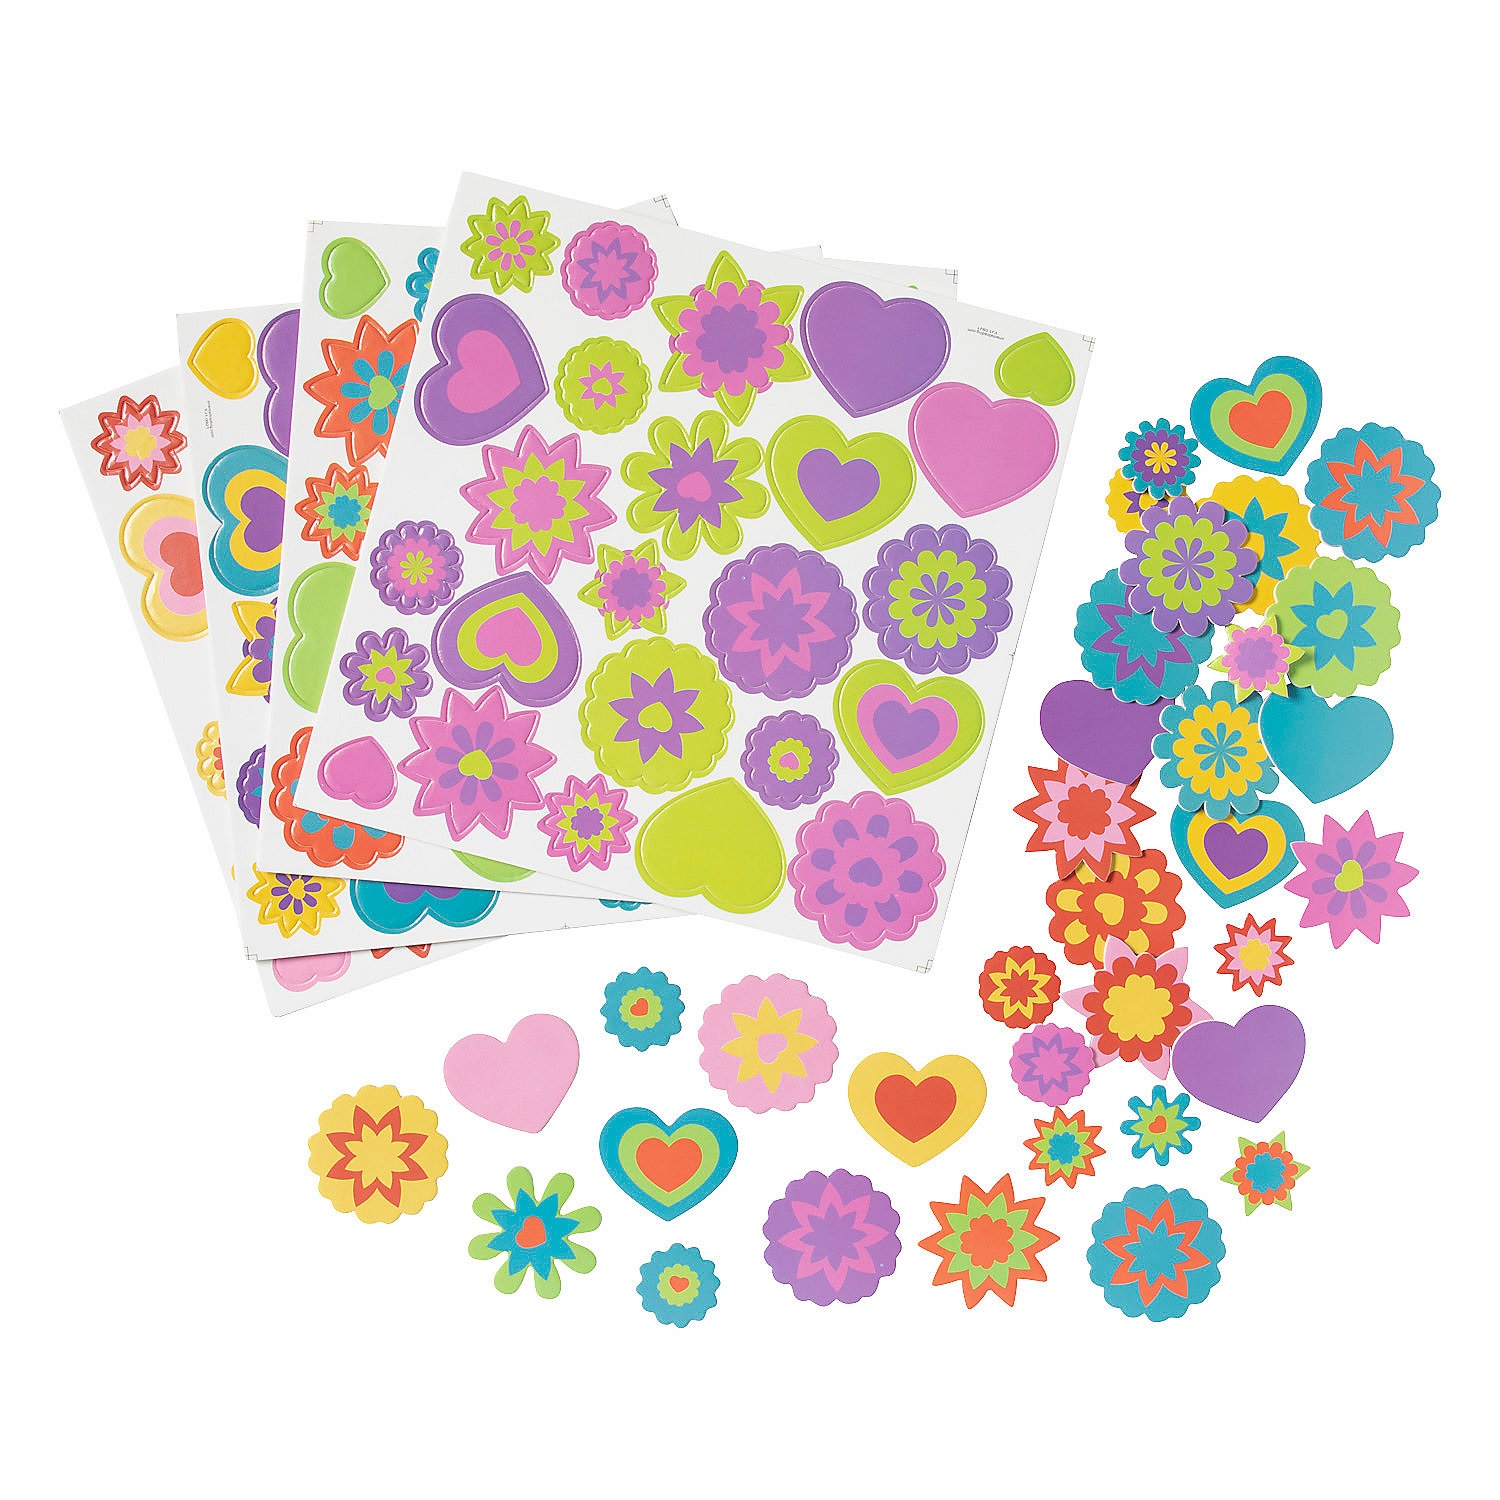 hearts-and-flowers-self-adhesive-shapes-500-pc-_13719950